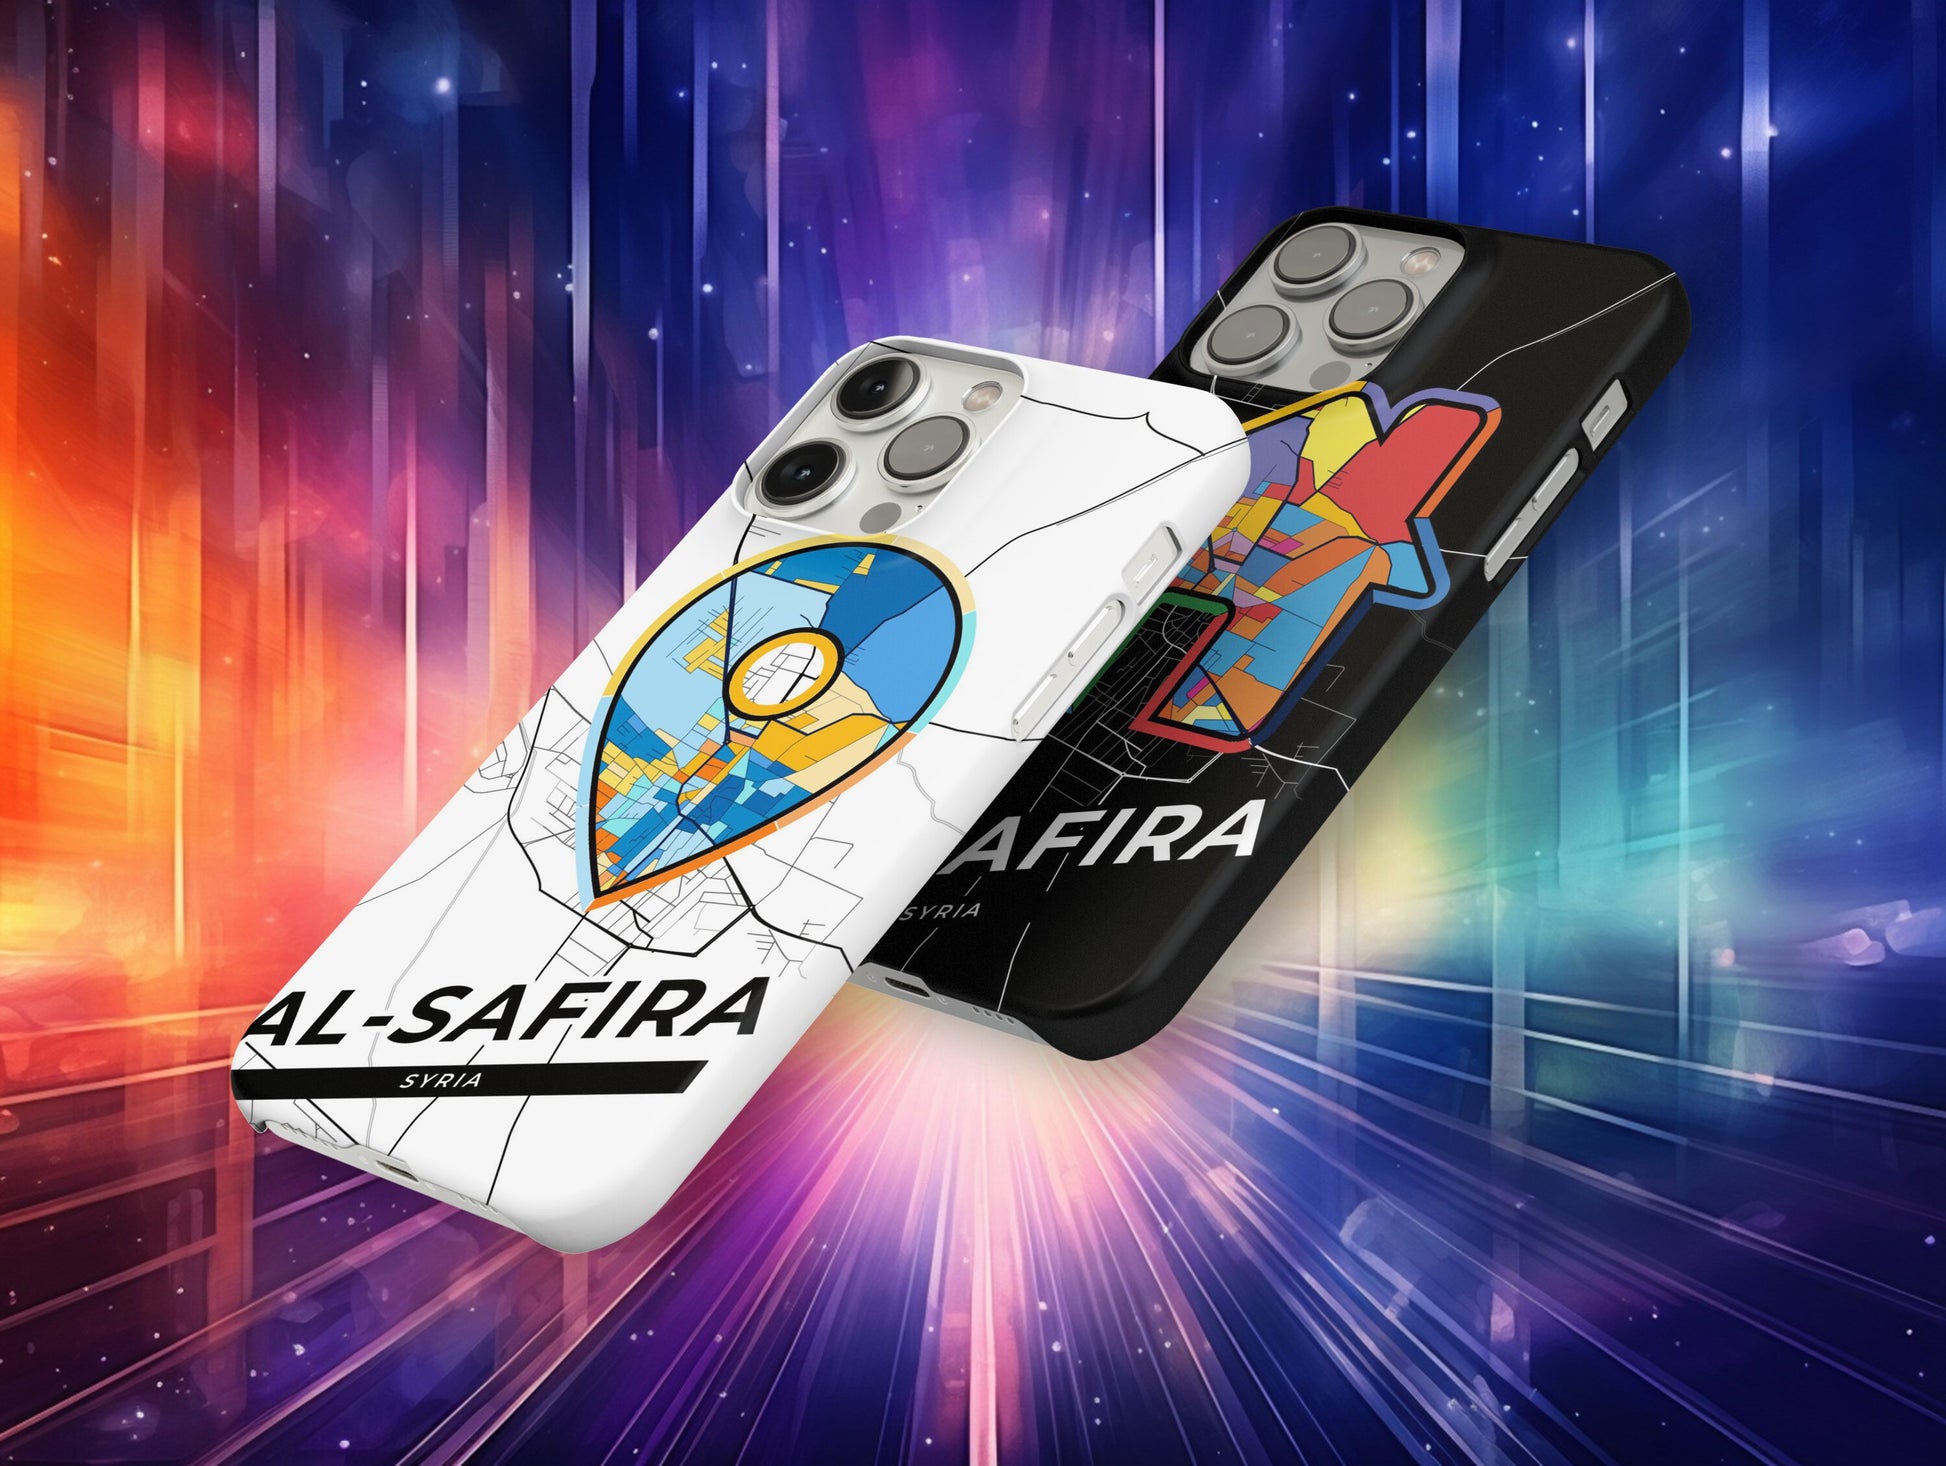 Al-Safira Syria slim phone case with colorful icon. Birthday, wedding or housewarming gift. Couple match cases.